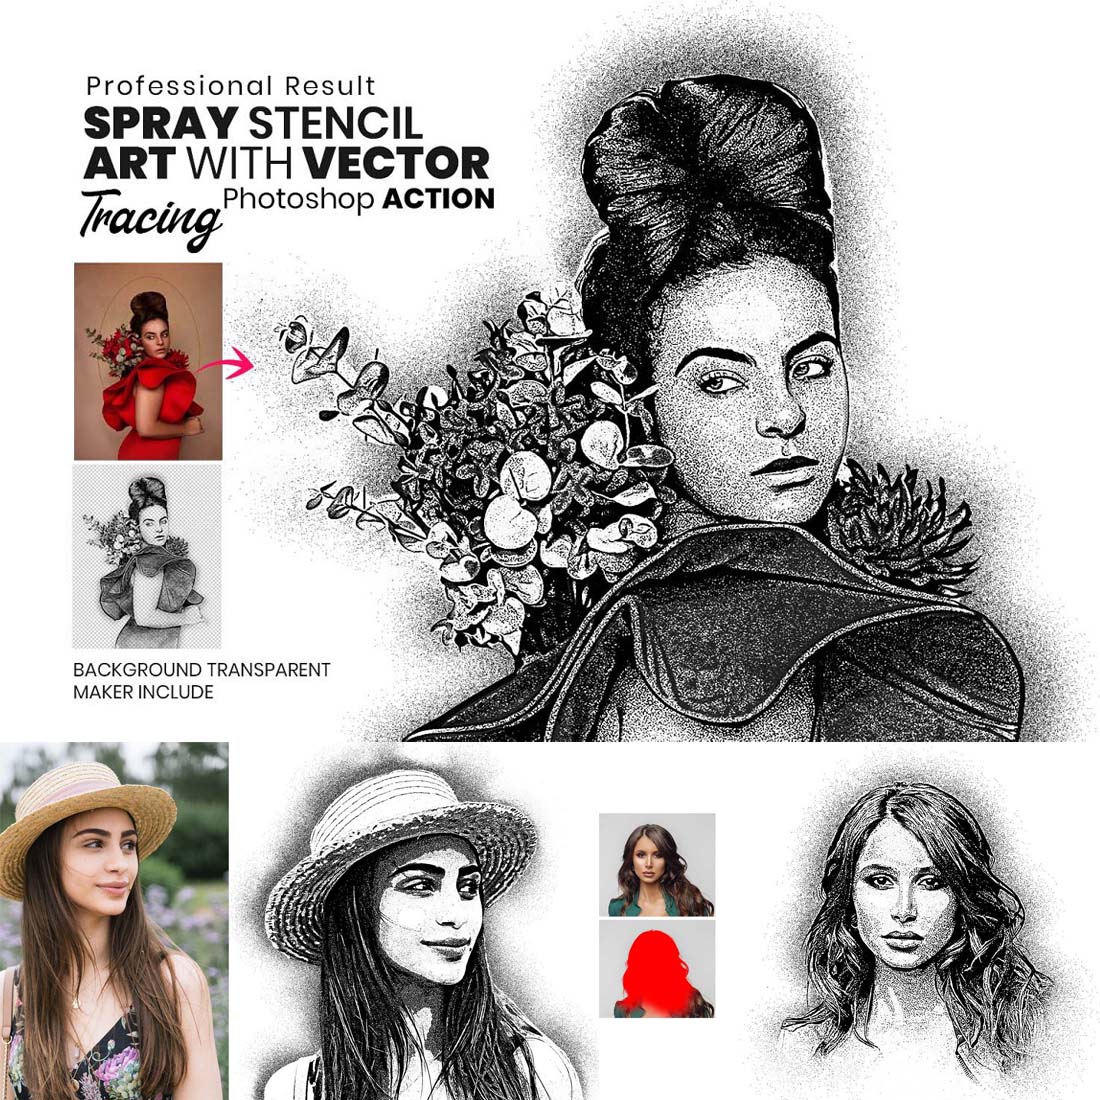 Spray Stencil Art Photoshop Action cover image.